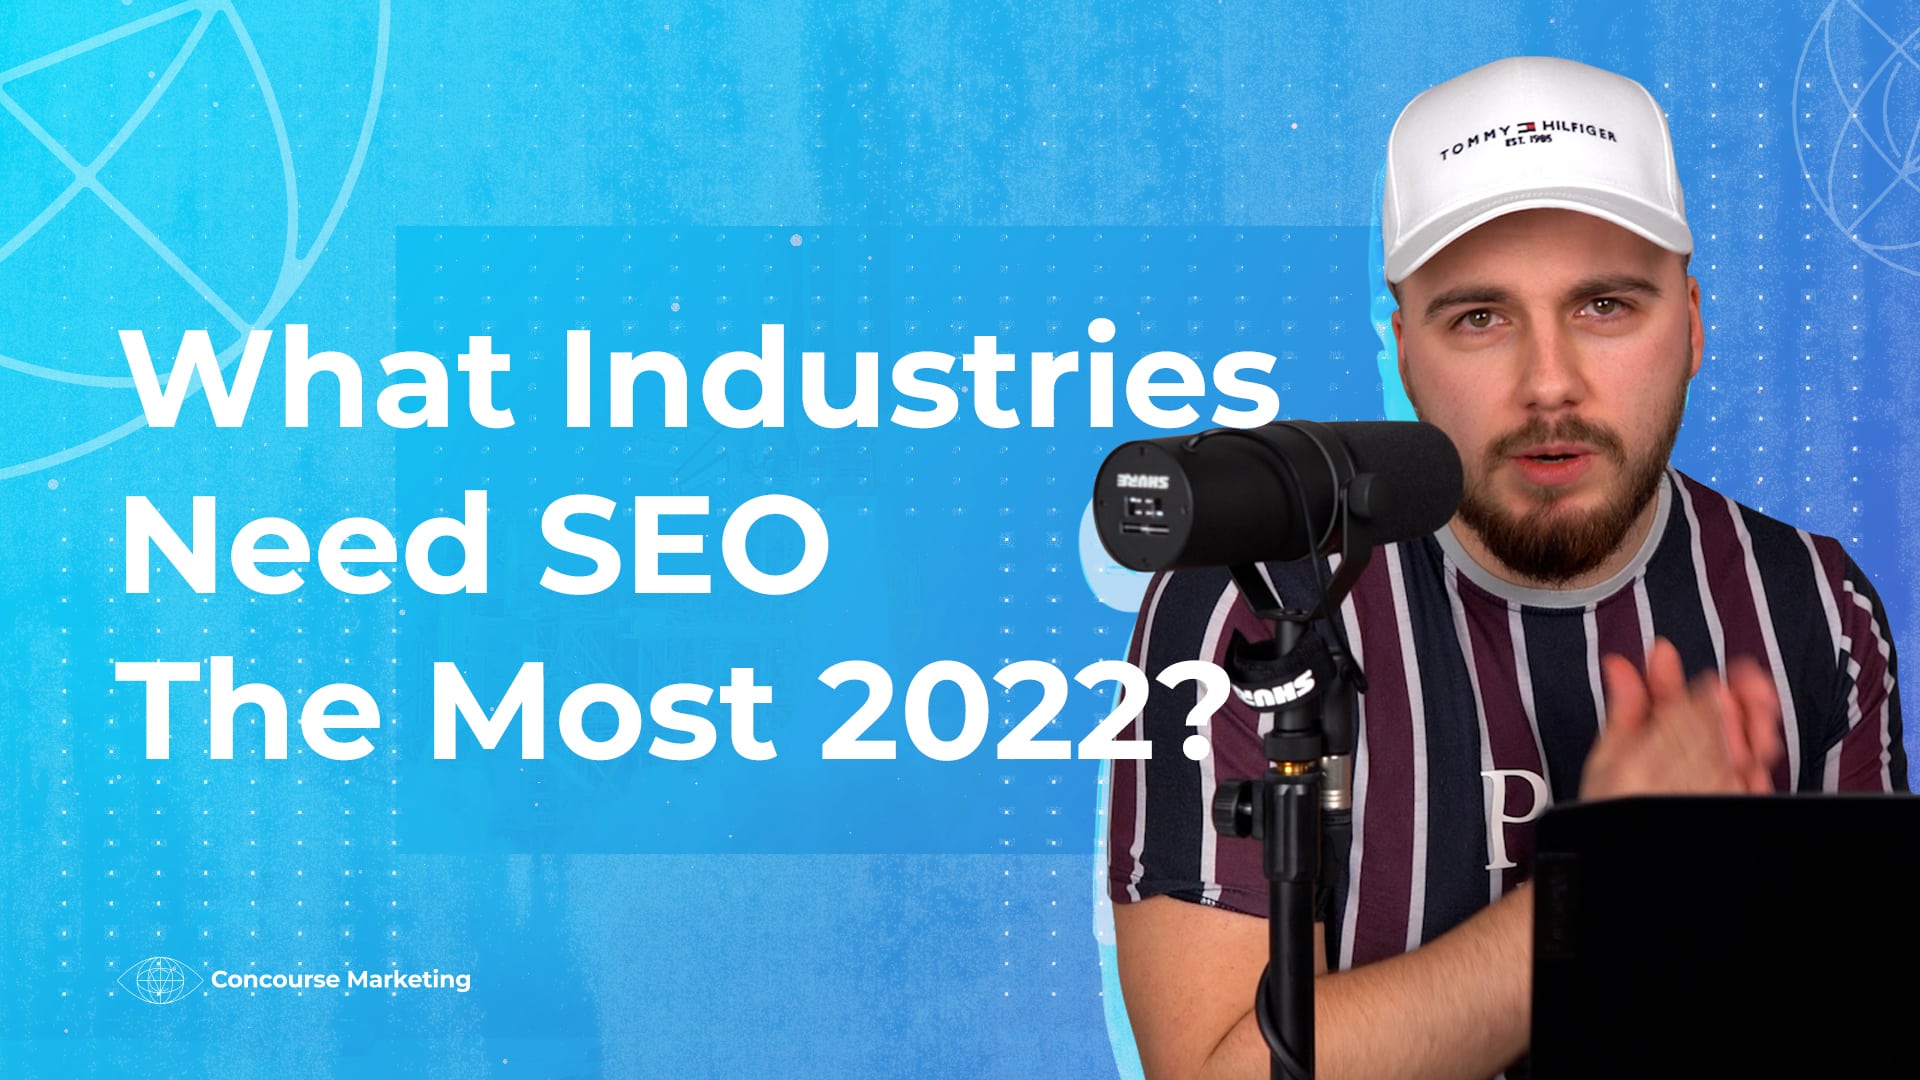 What Industries Need SEO The Most 2022